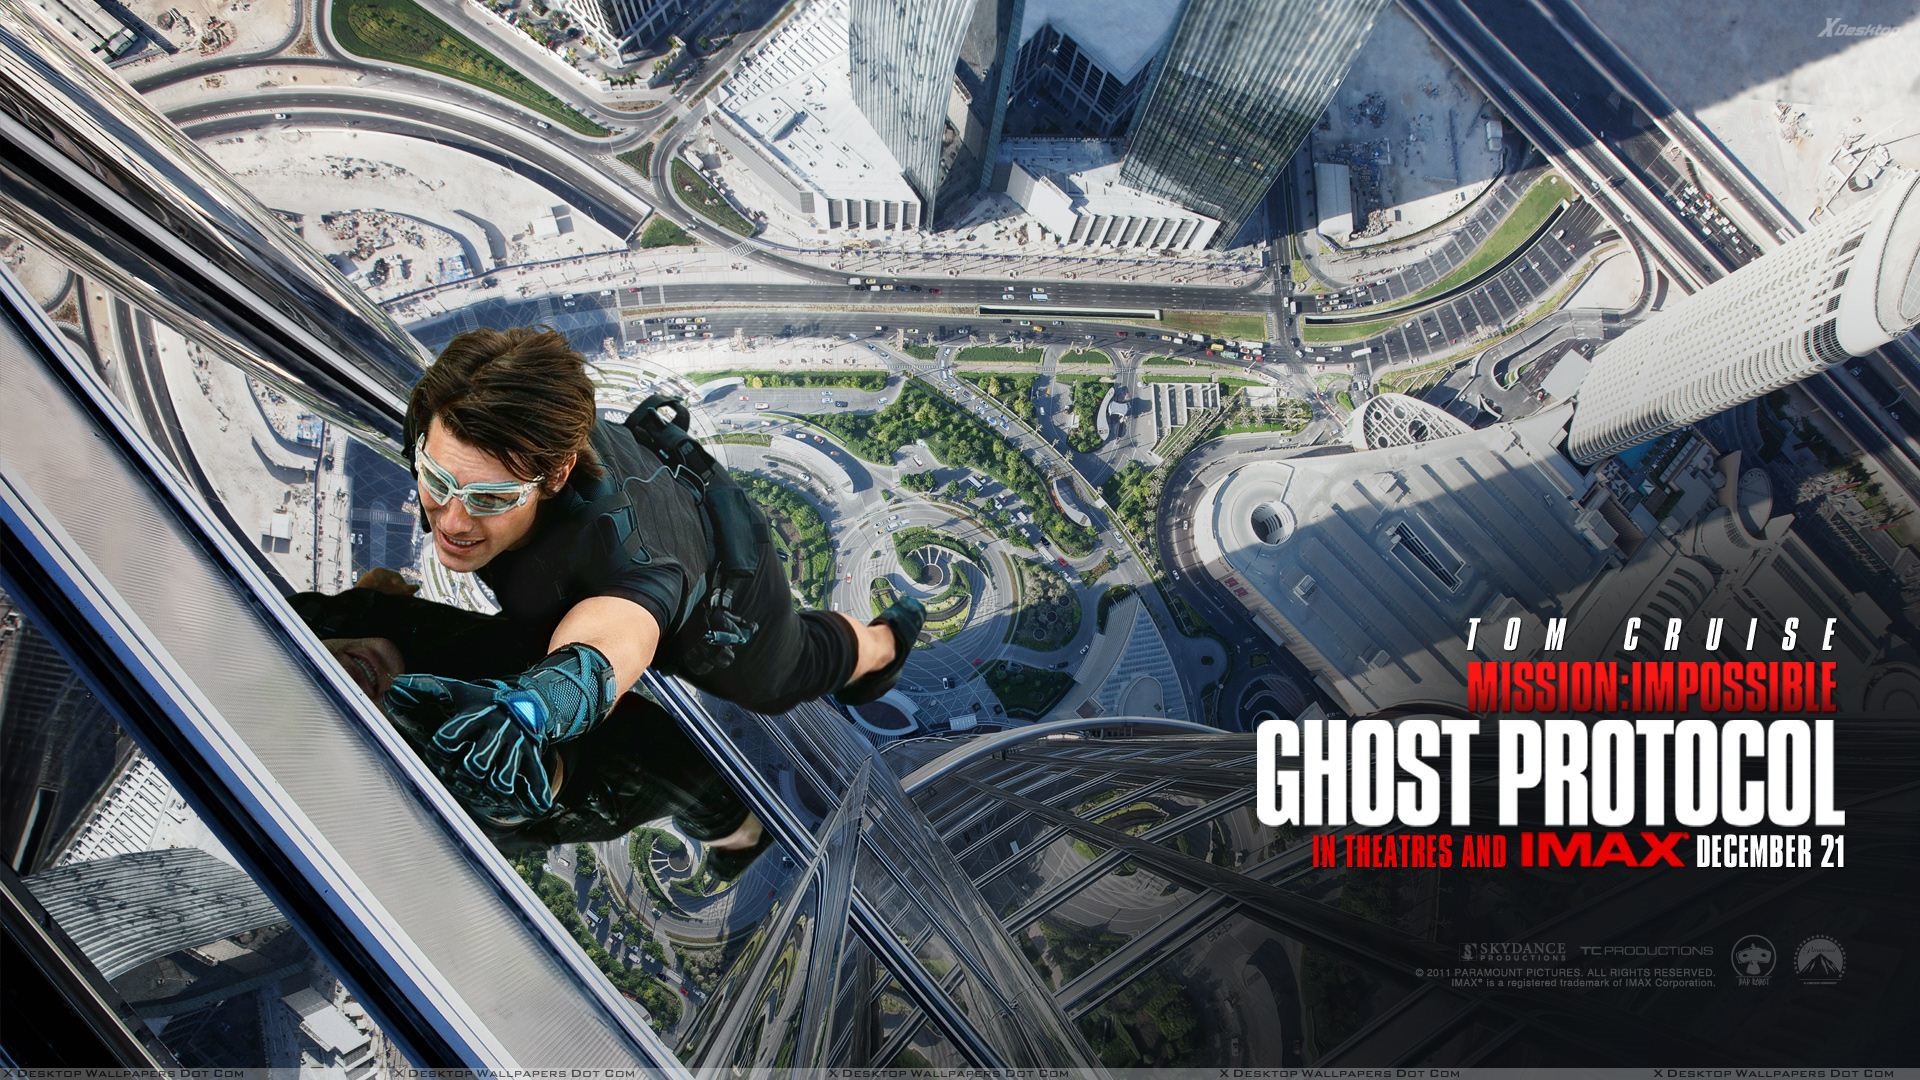 1920x1080 Mission Impossible Ghost Protocol Hanging Outside Building